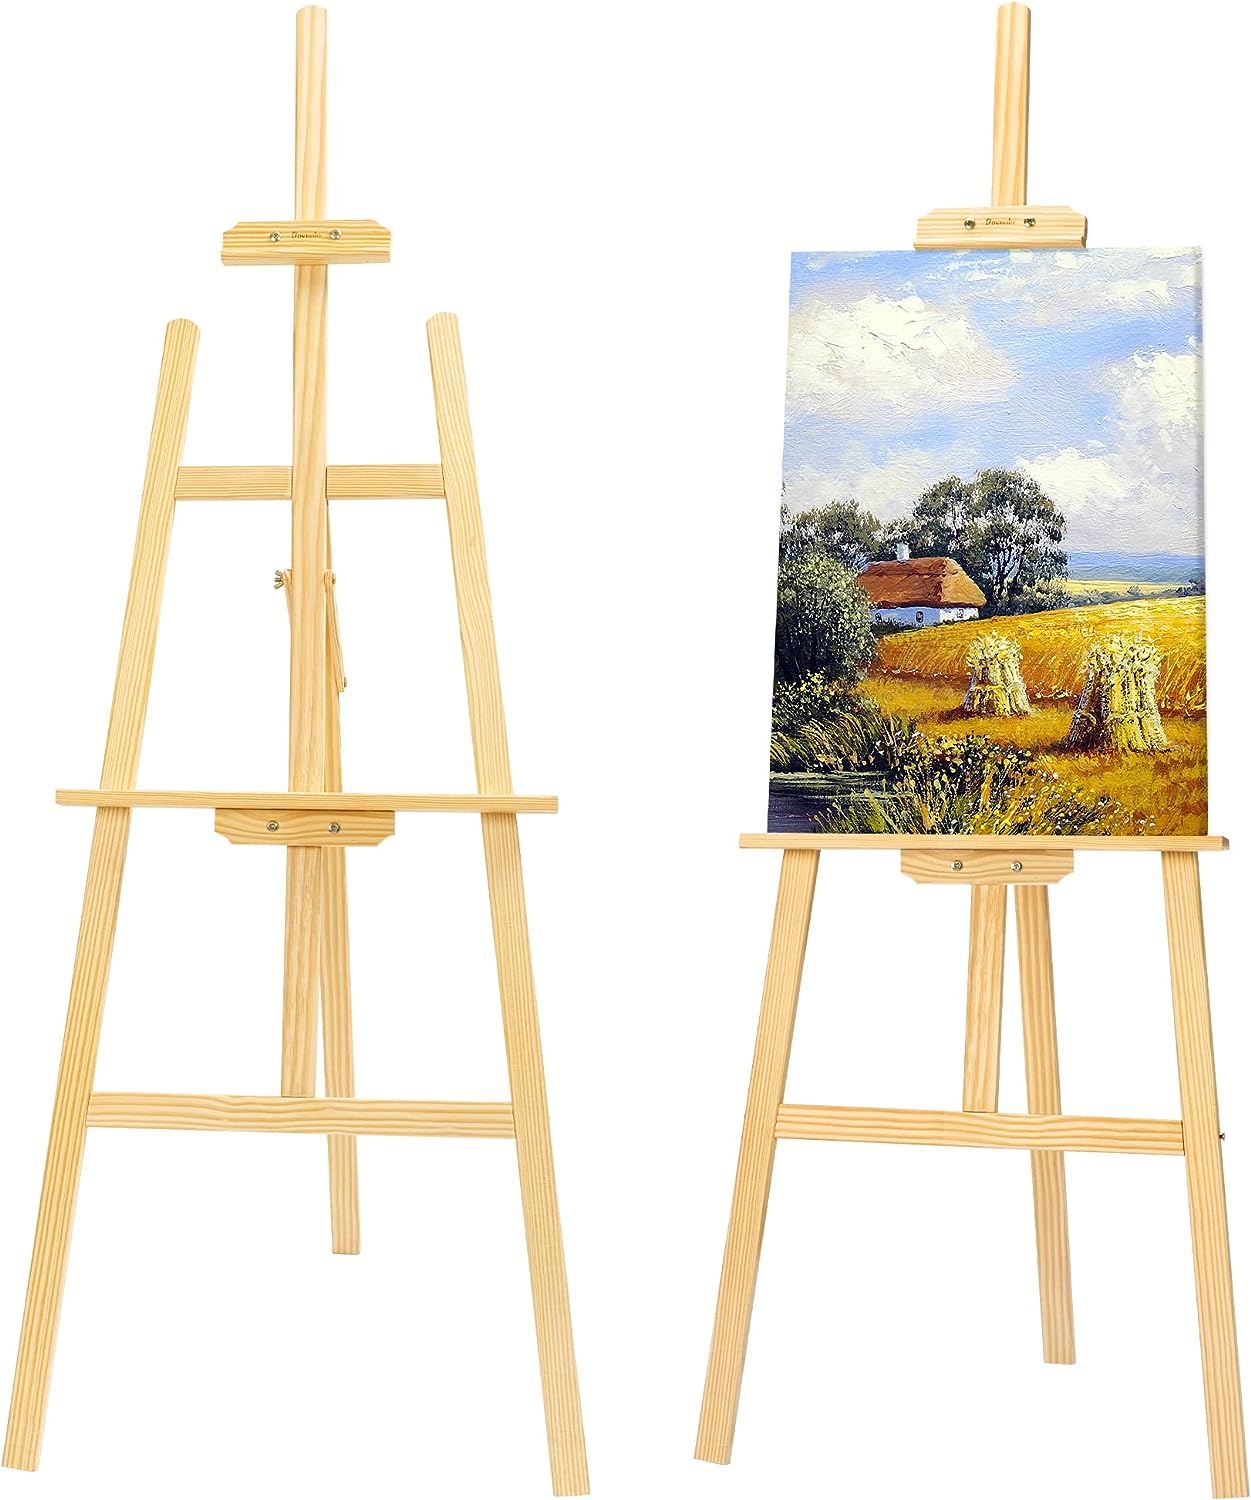 Starhoo starhoo 12 inch tabletop easel for painting canvas table top